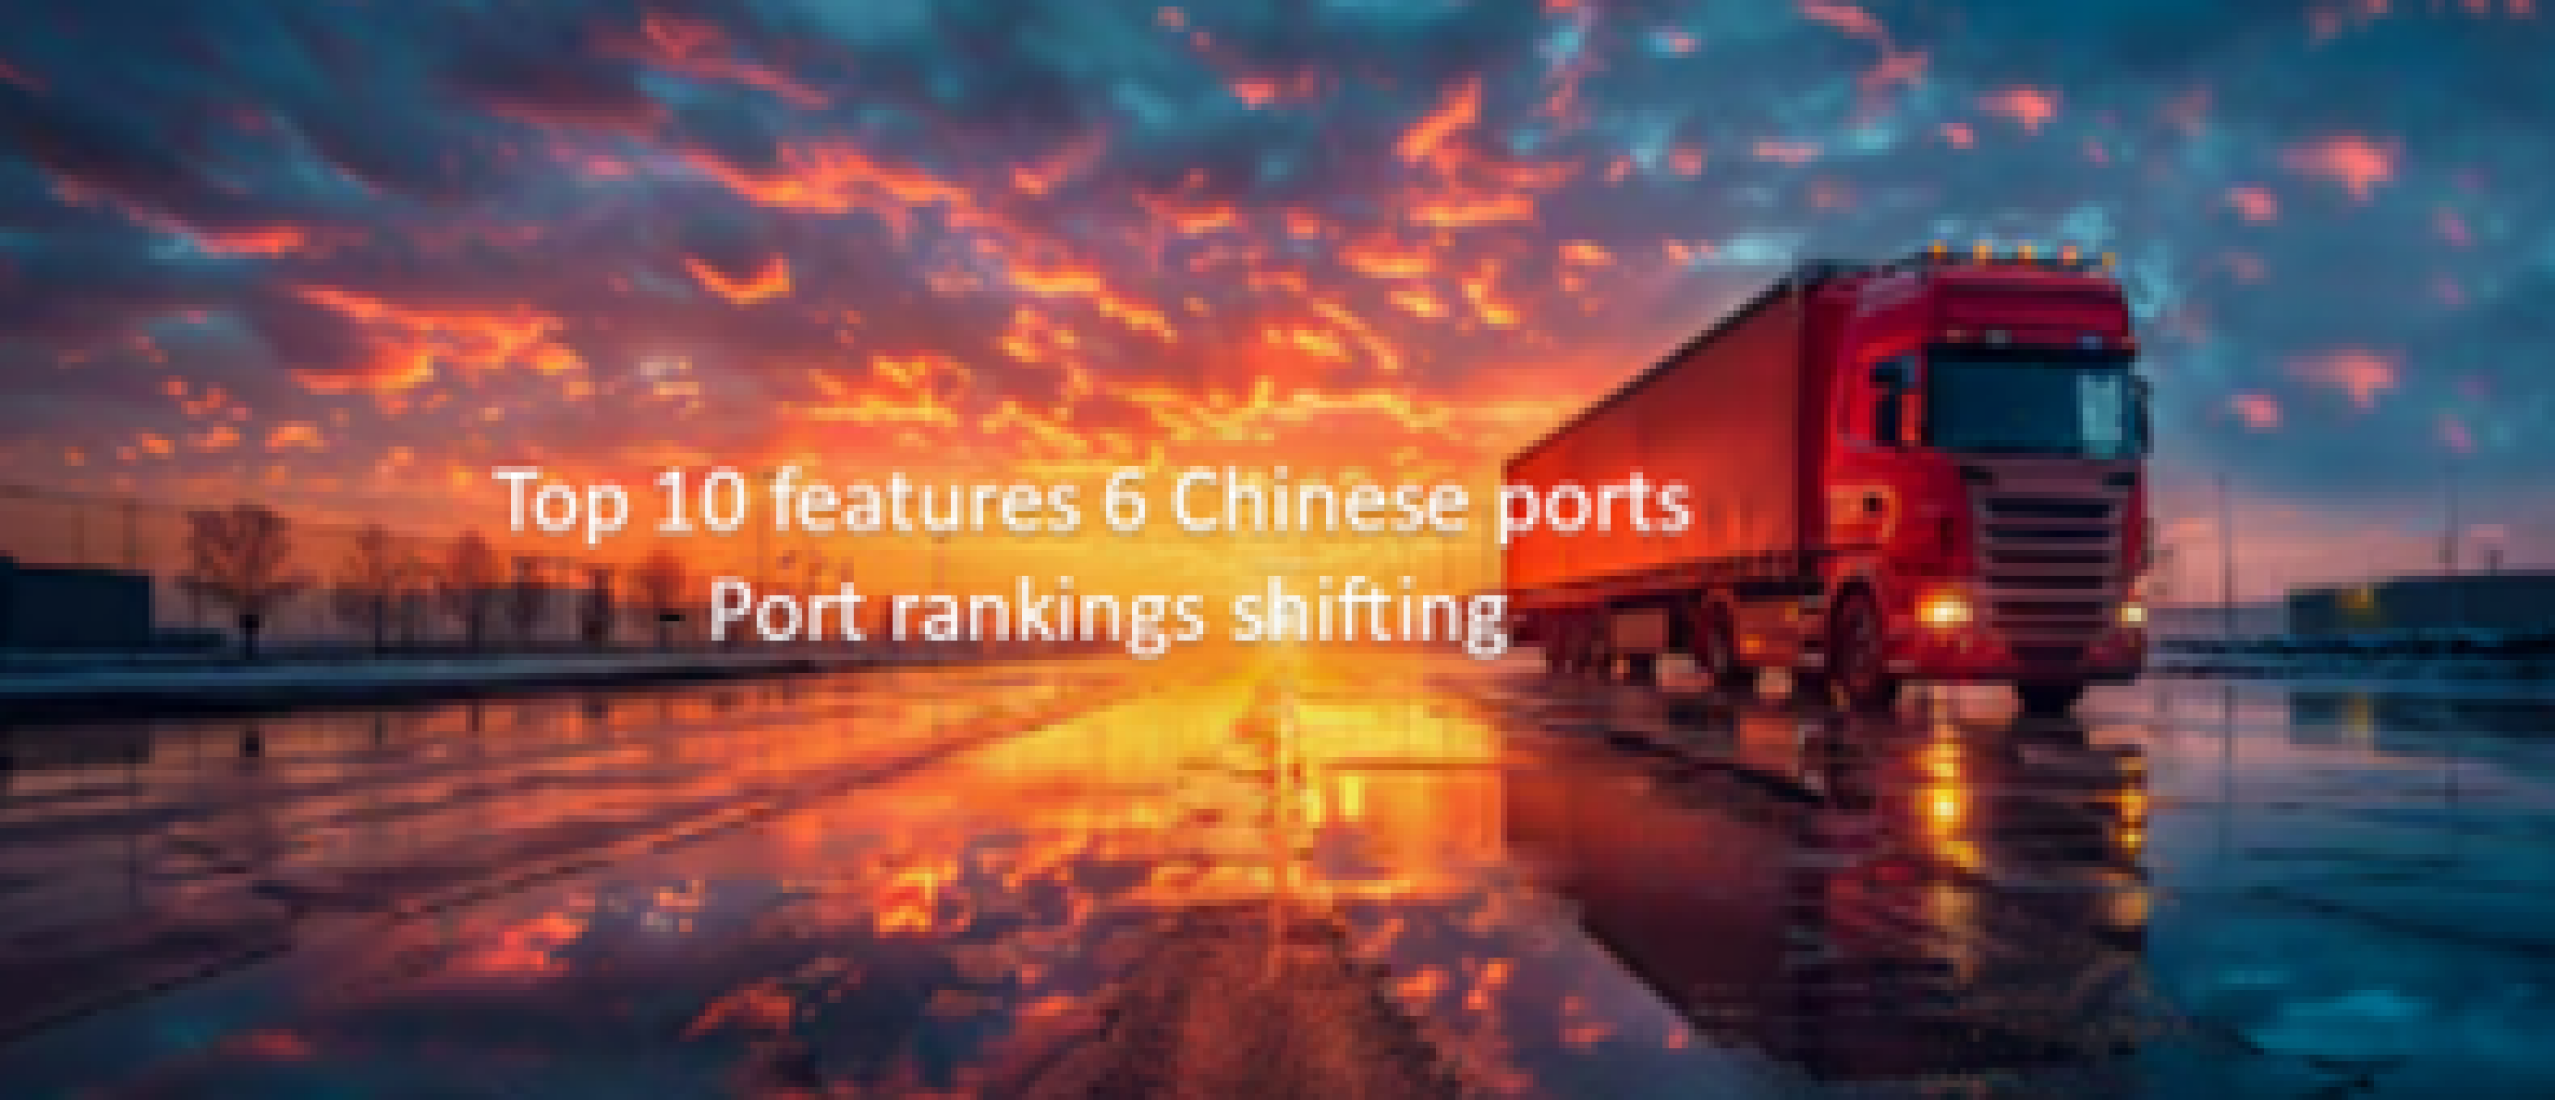 Port rankings shifting - top 10 features 6 Chinese ports